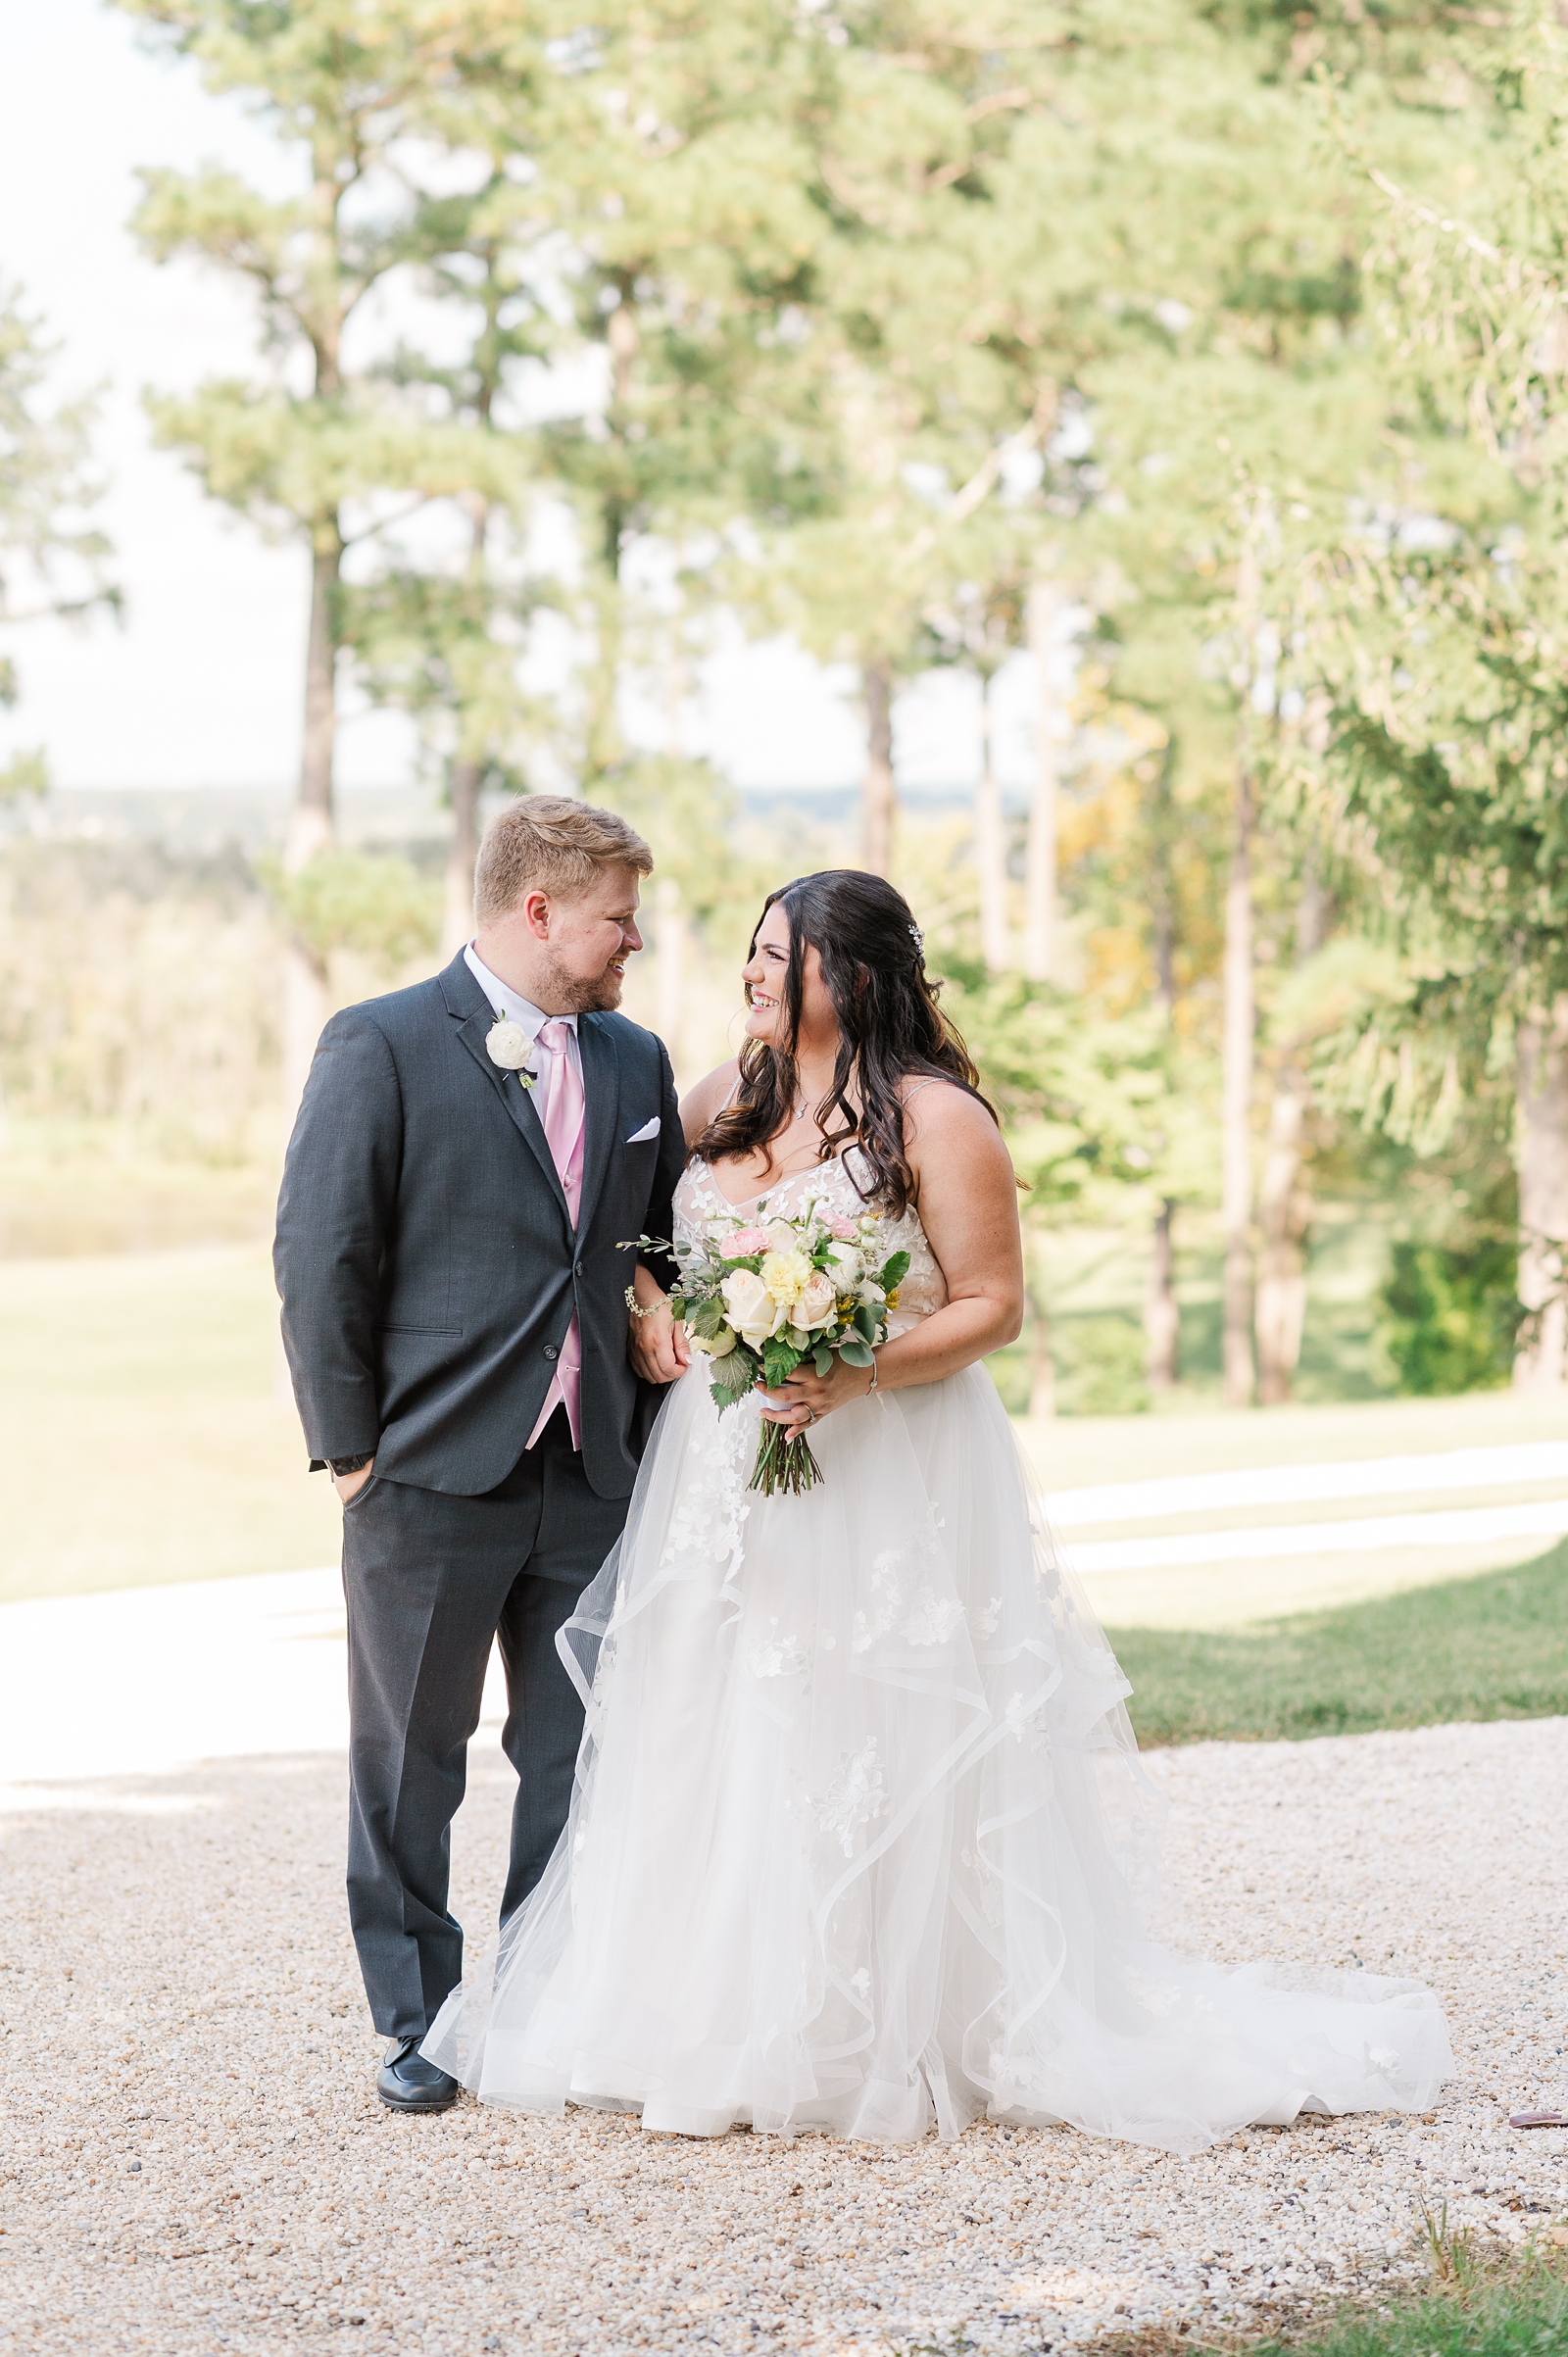 Bride and Groom First Look Portraits at Cumberland Estate Wedding. Photography by Virginia Wedding Photographer Kailey Brianne Photography. 